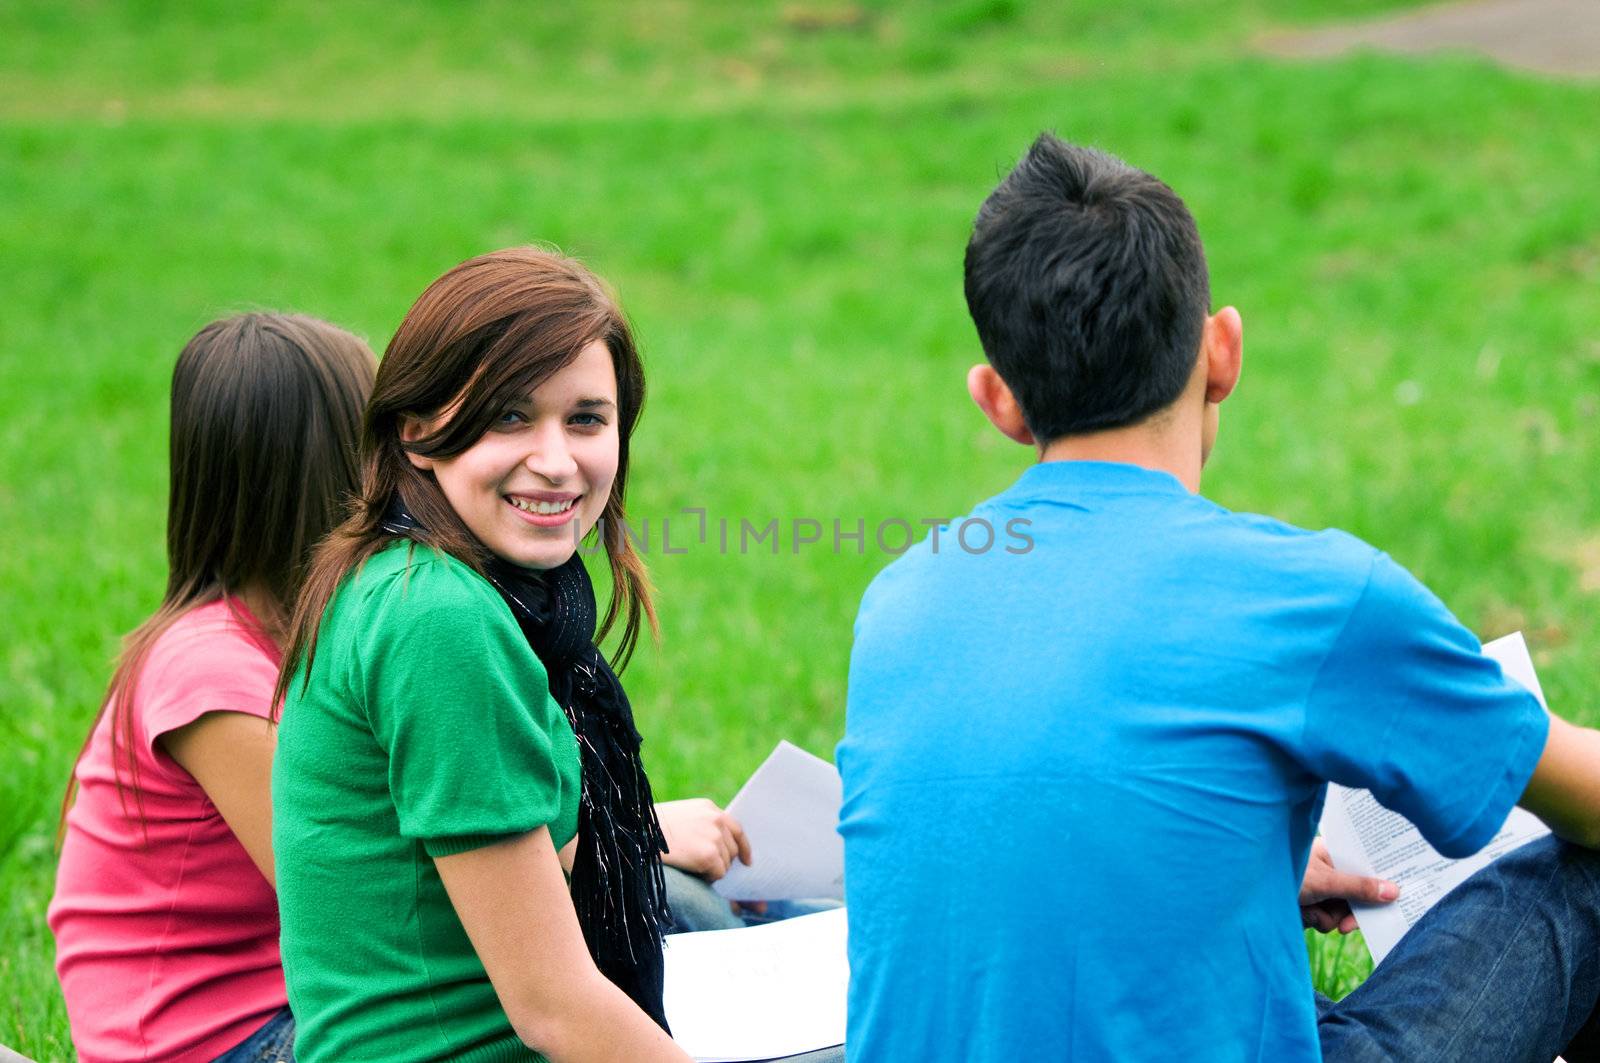 Highschool students learning together outdoor